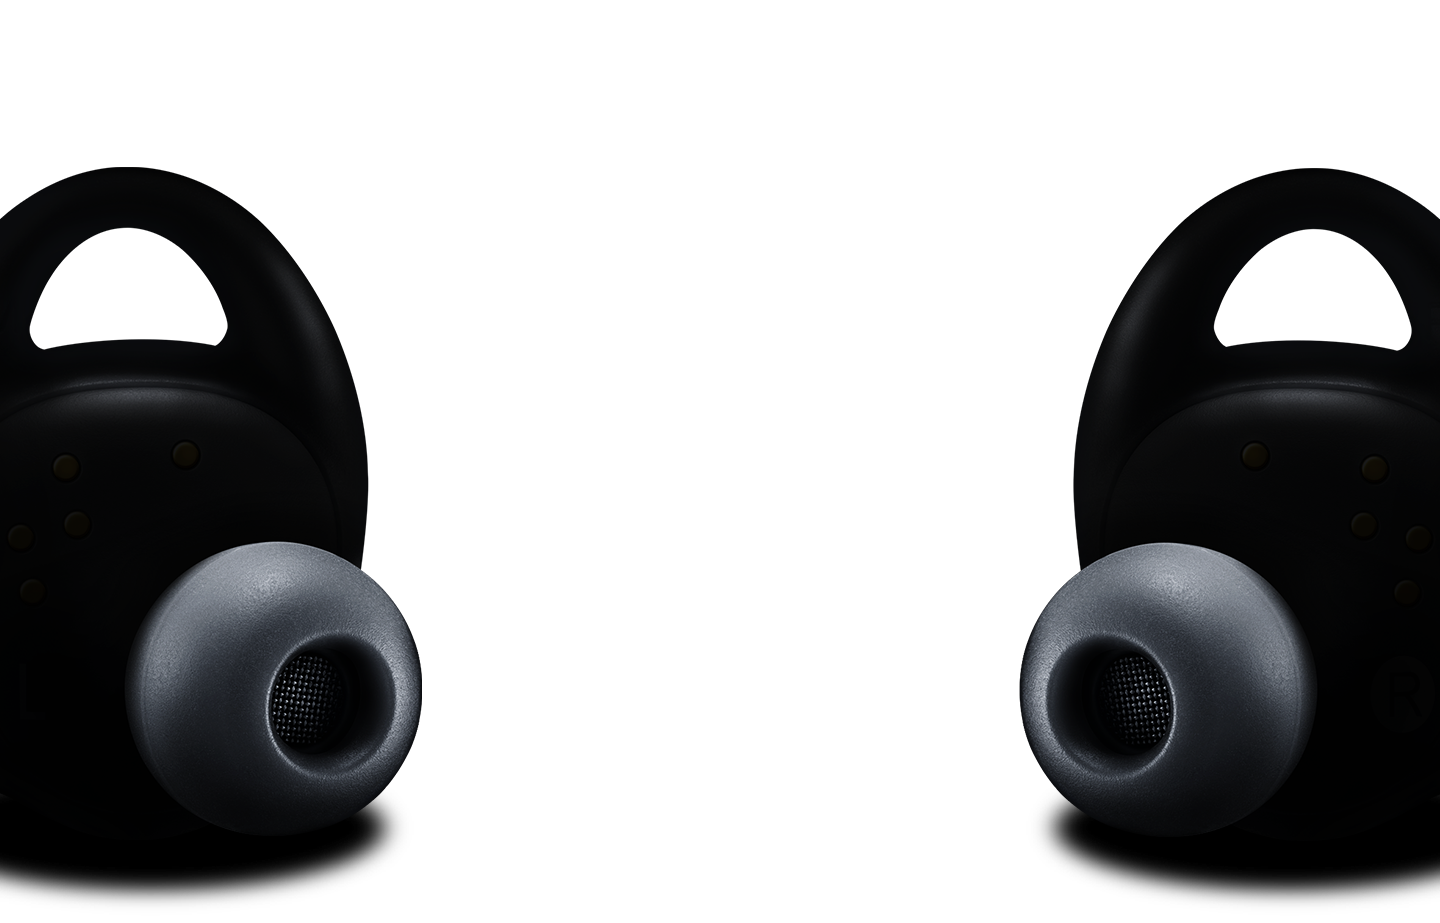 A pair of Gear IconX in black that consists of the left and right earbuds